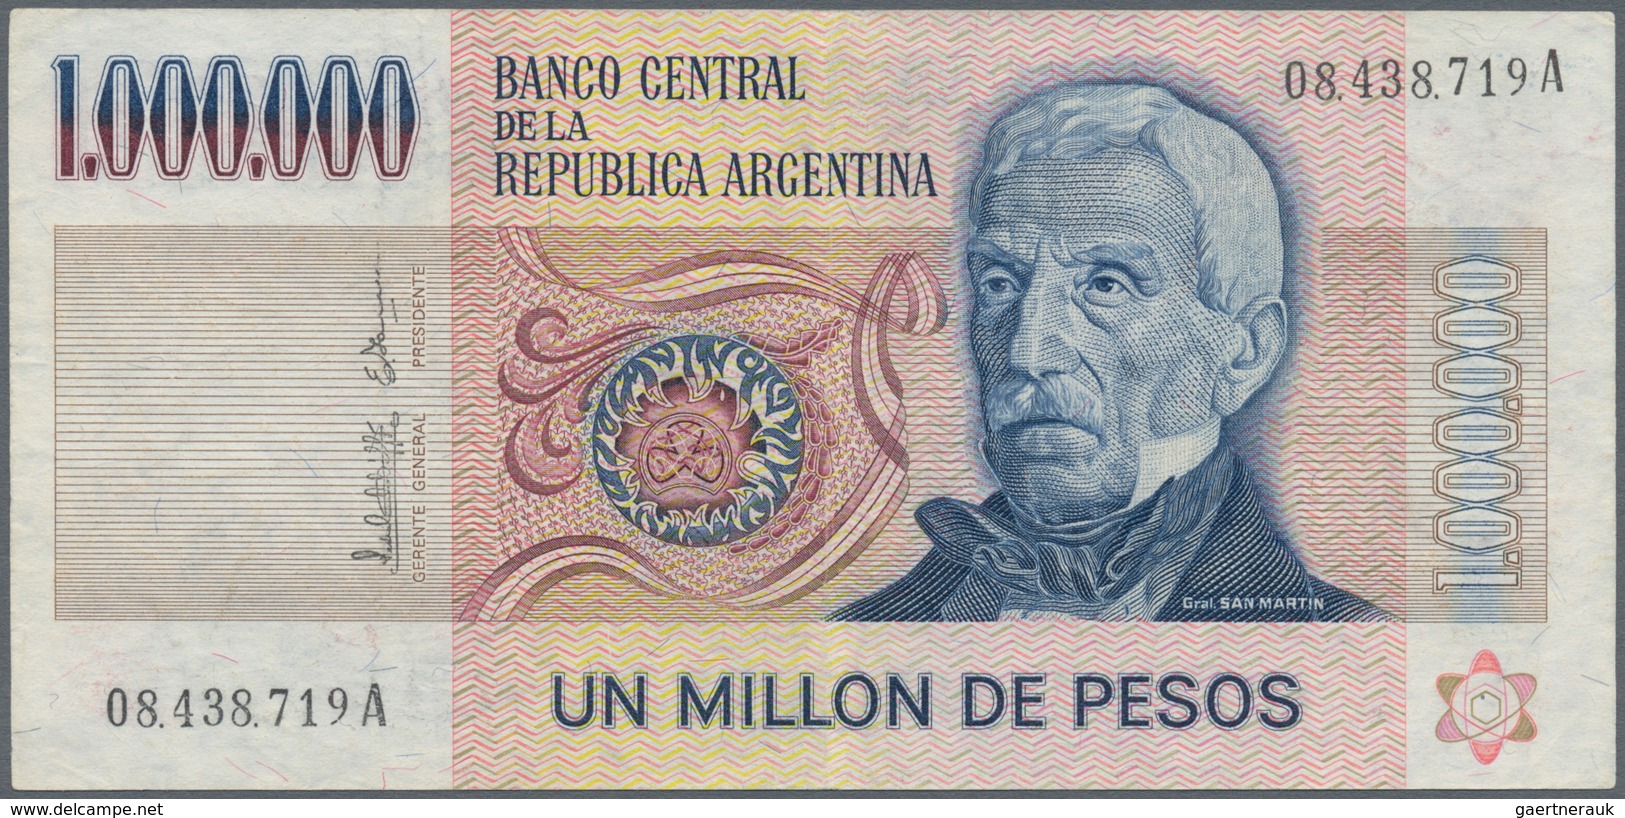 Argentina / Argentinien: collection of 134 mostly different banknotes from Argentina, mostly in UNC